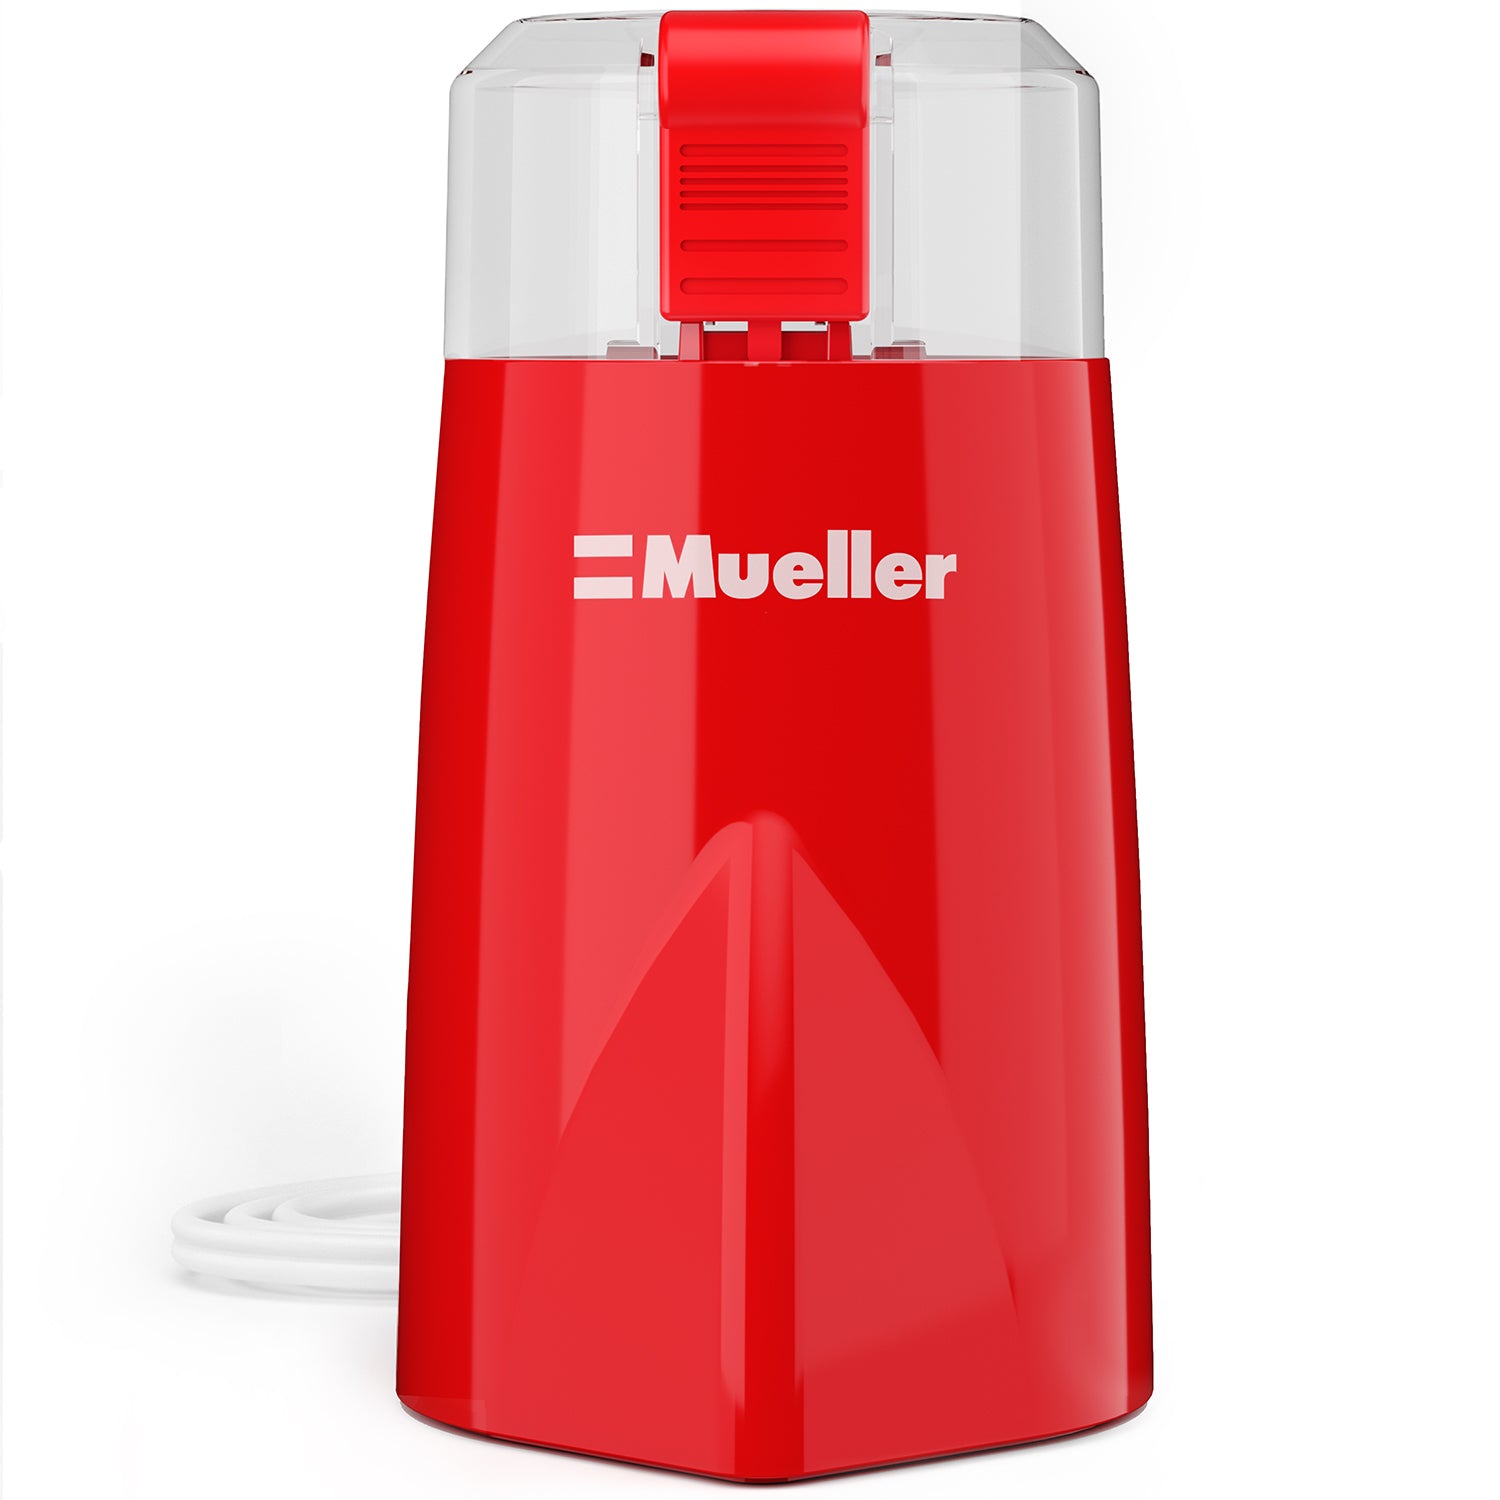 Mueller Electric HyperGrind Spice and Coffee Grinder - Red